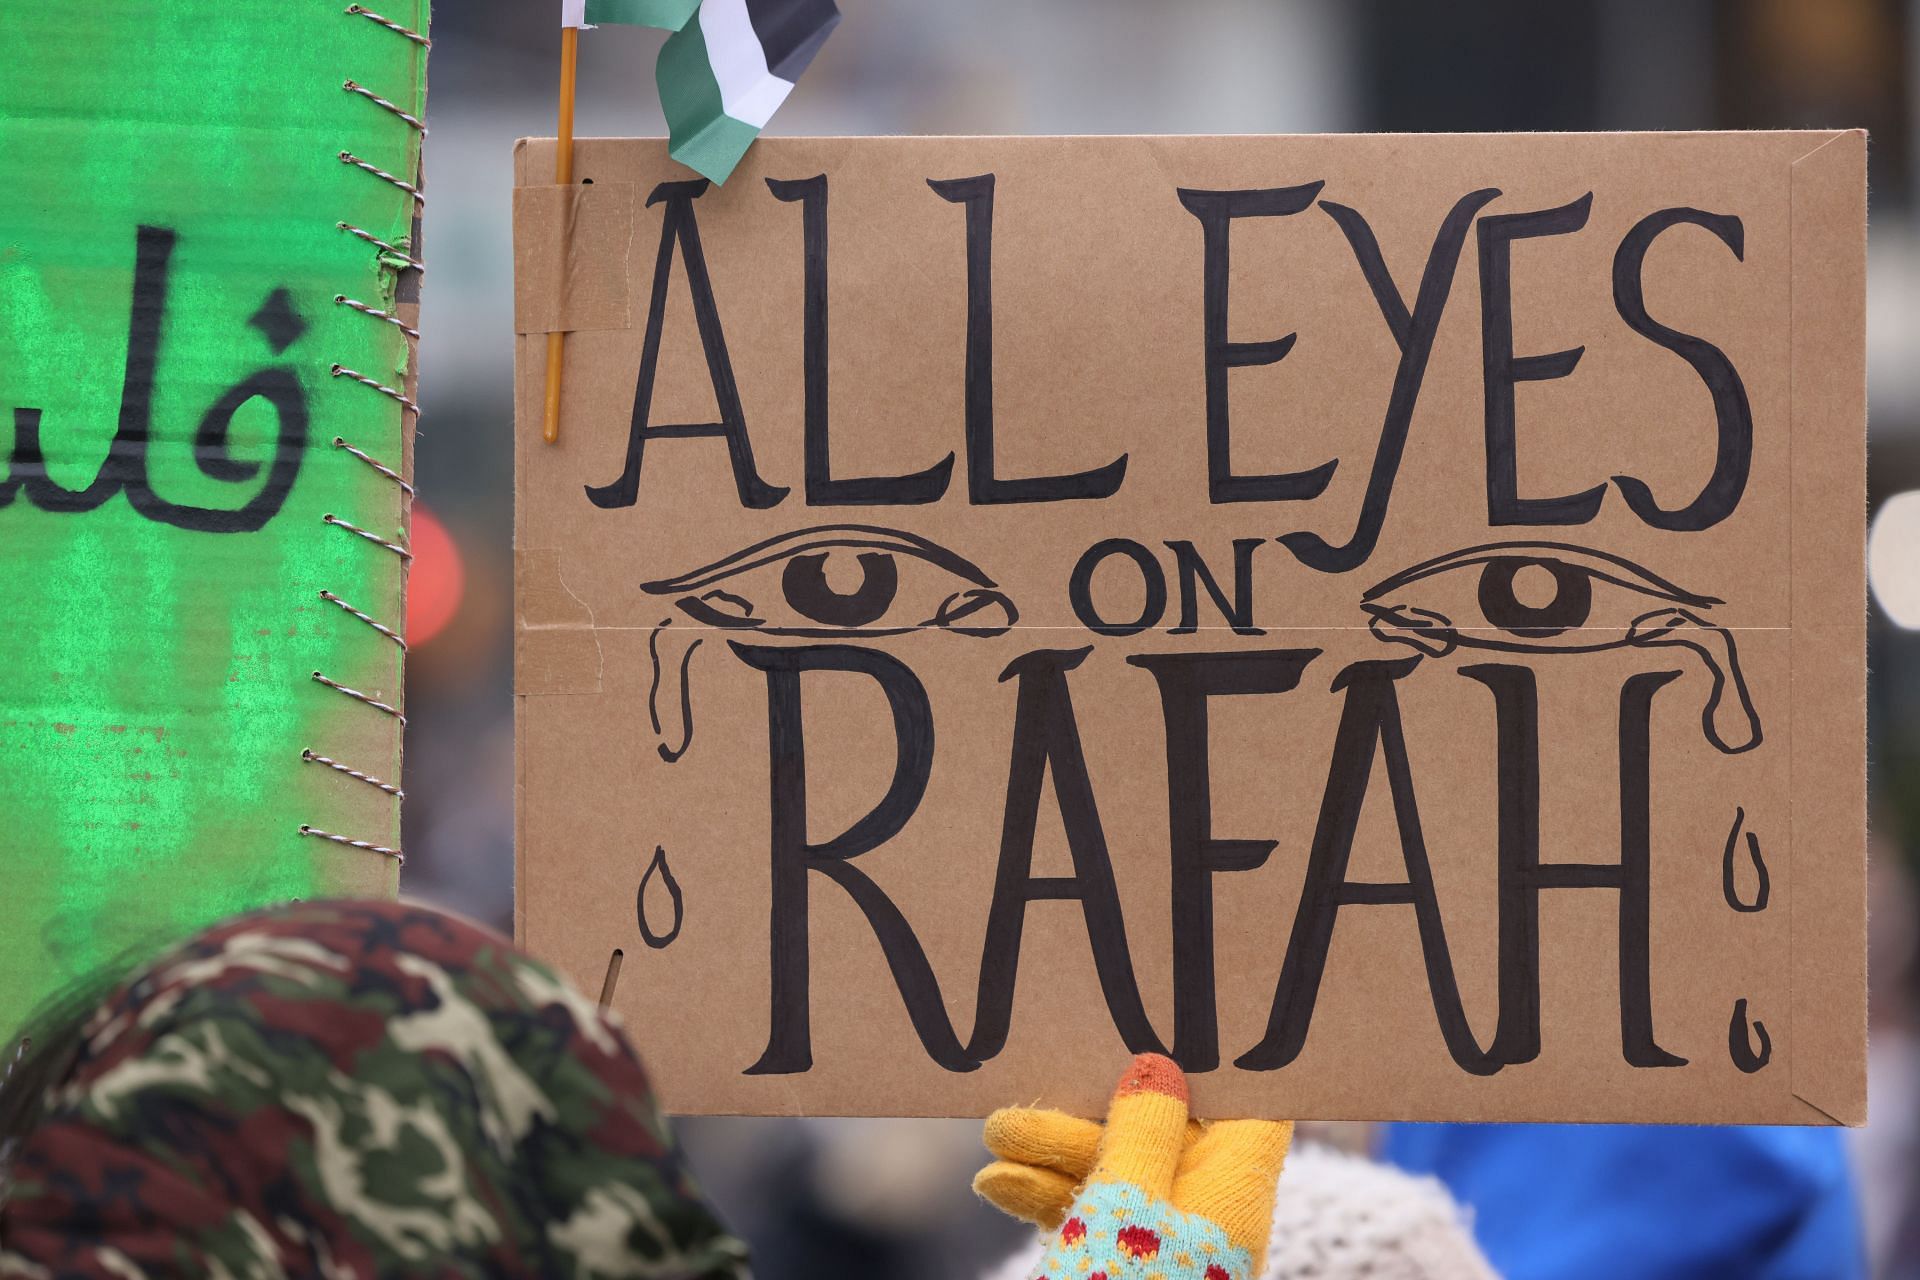 Demonstration Held In New York Calling On Israel To Call Off Rafah Invasion In Gaza